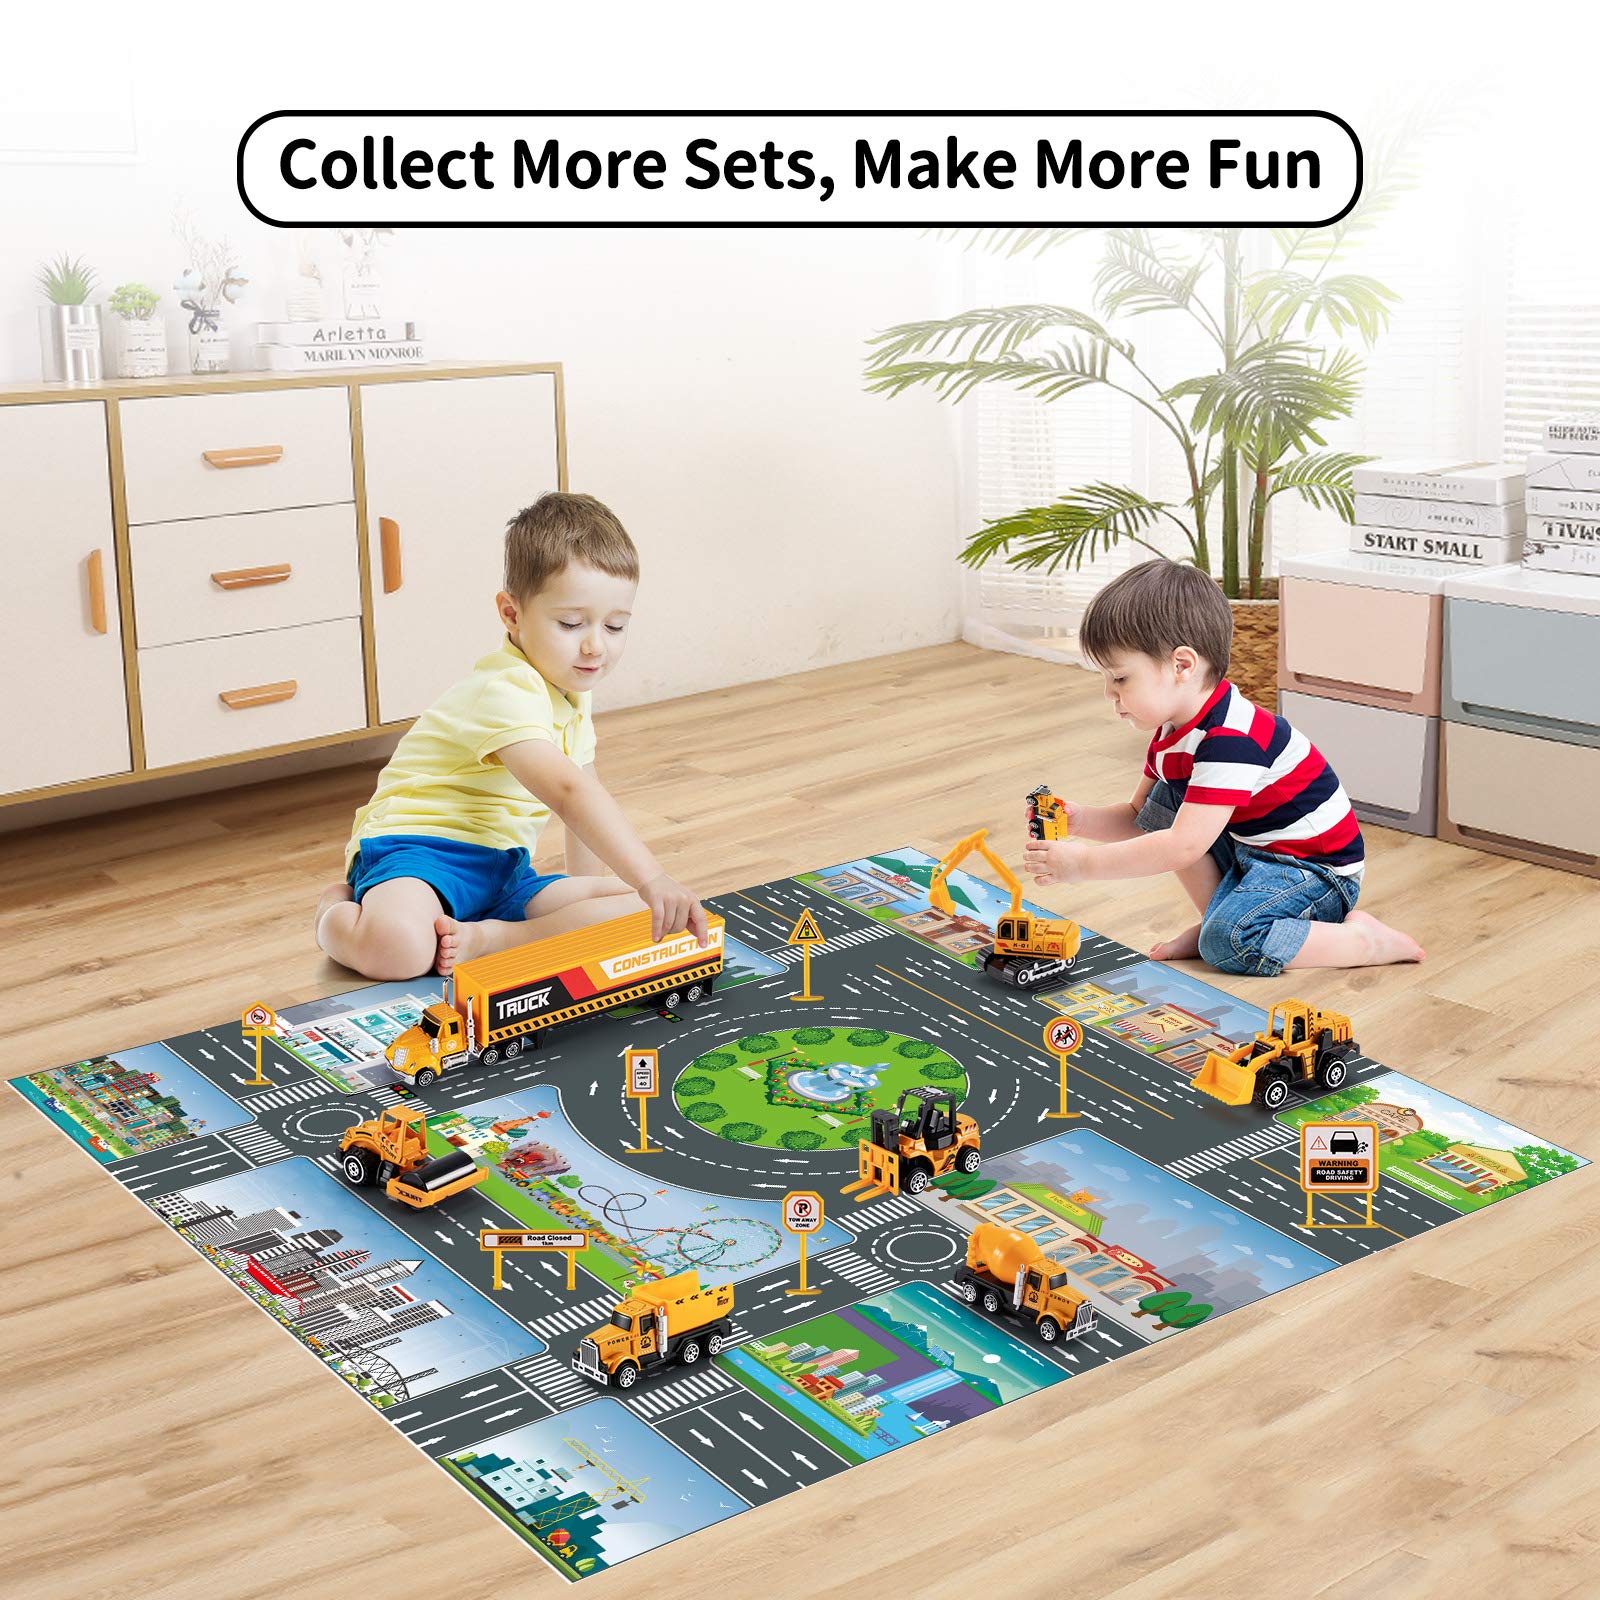 TEMI Diecast Engineering Construction Vehicle Toy Set w/ Play Mat,Truck Carrier,Forklift,Bulldozer,Excavator,Mixer,Dump Truck, Alloy Metal Car Toys Set for 3 4 5 6 Years Old Toddlers Kids Boys & Girls